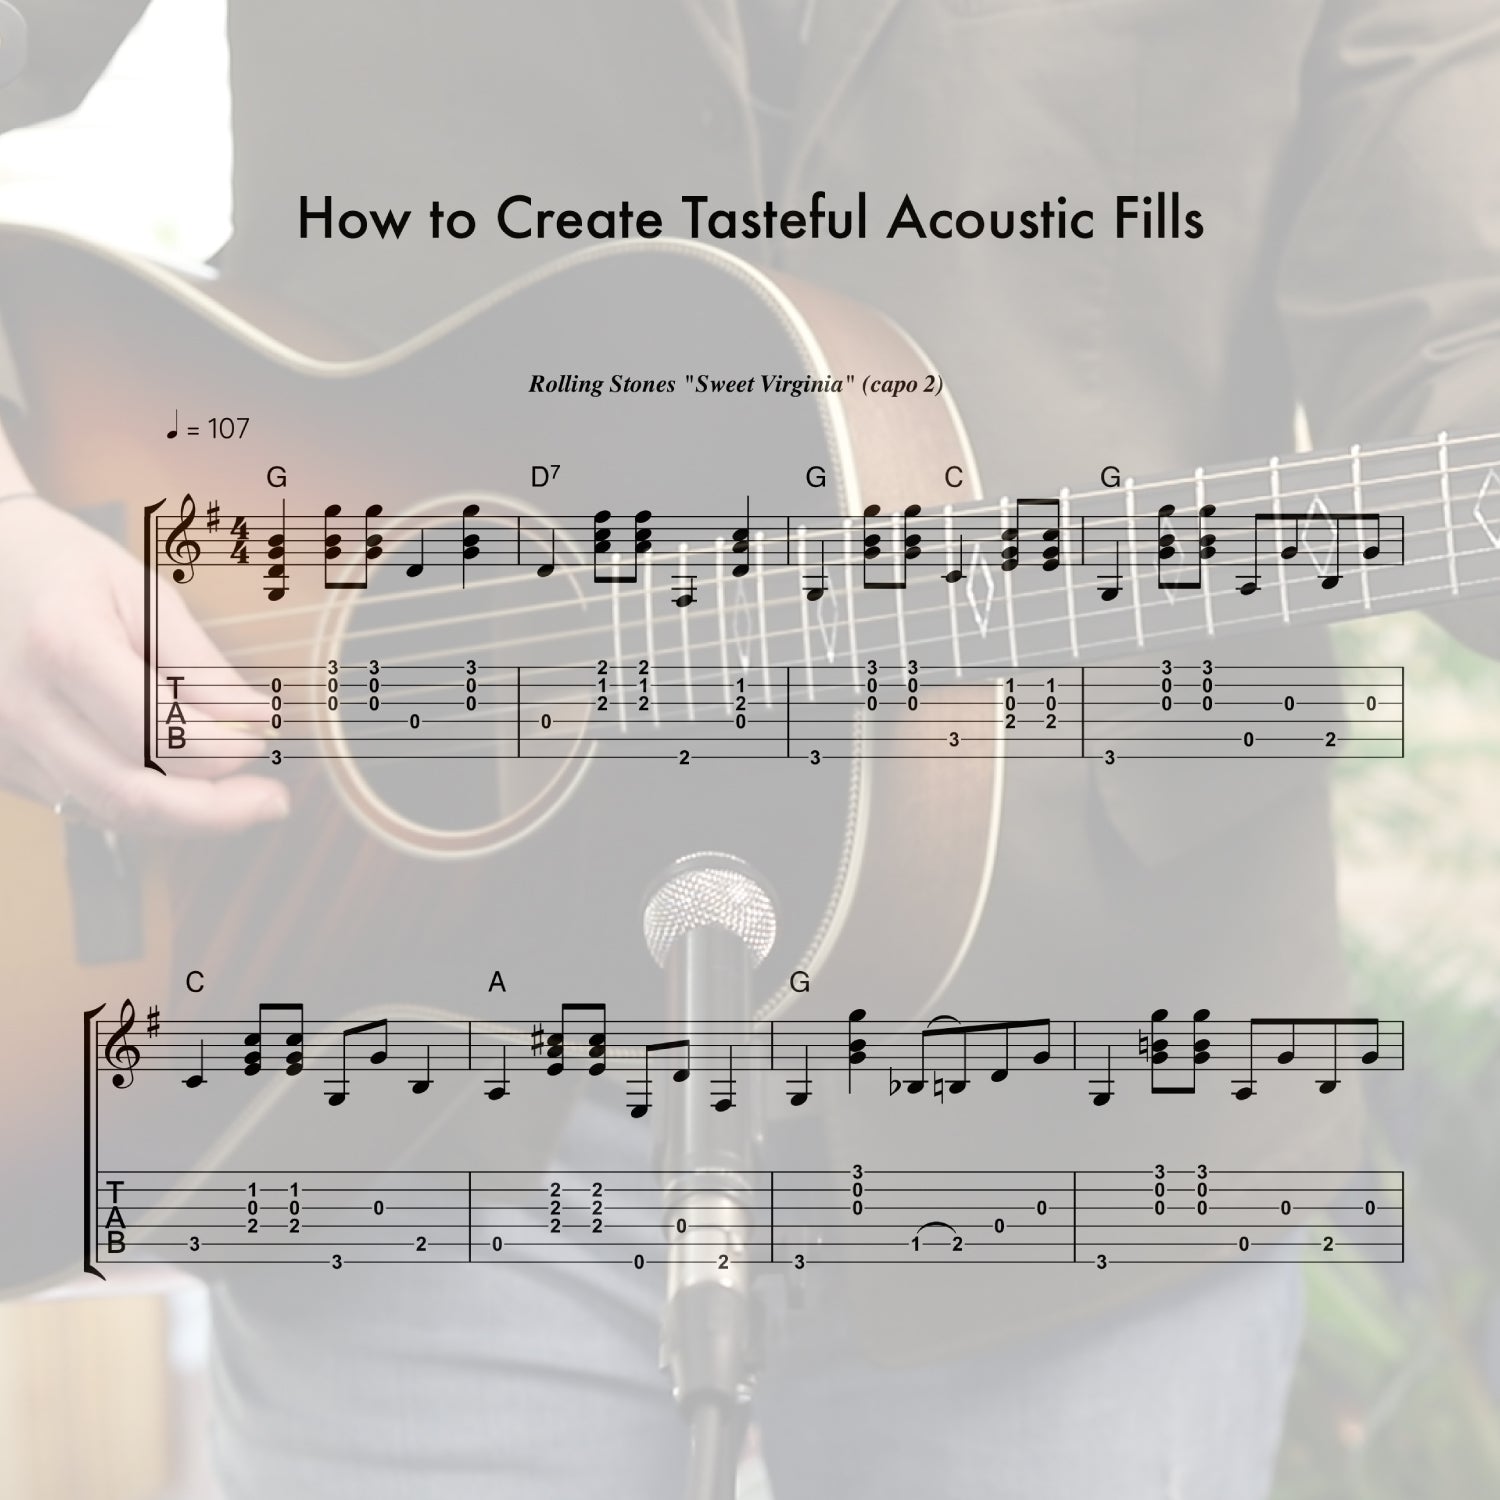 How to Create Tasteful Acoustic Fills